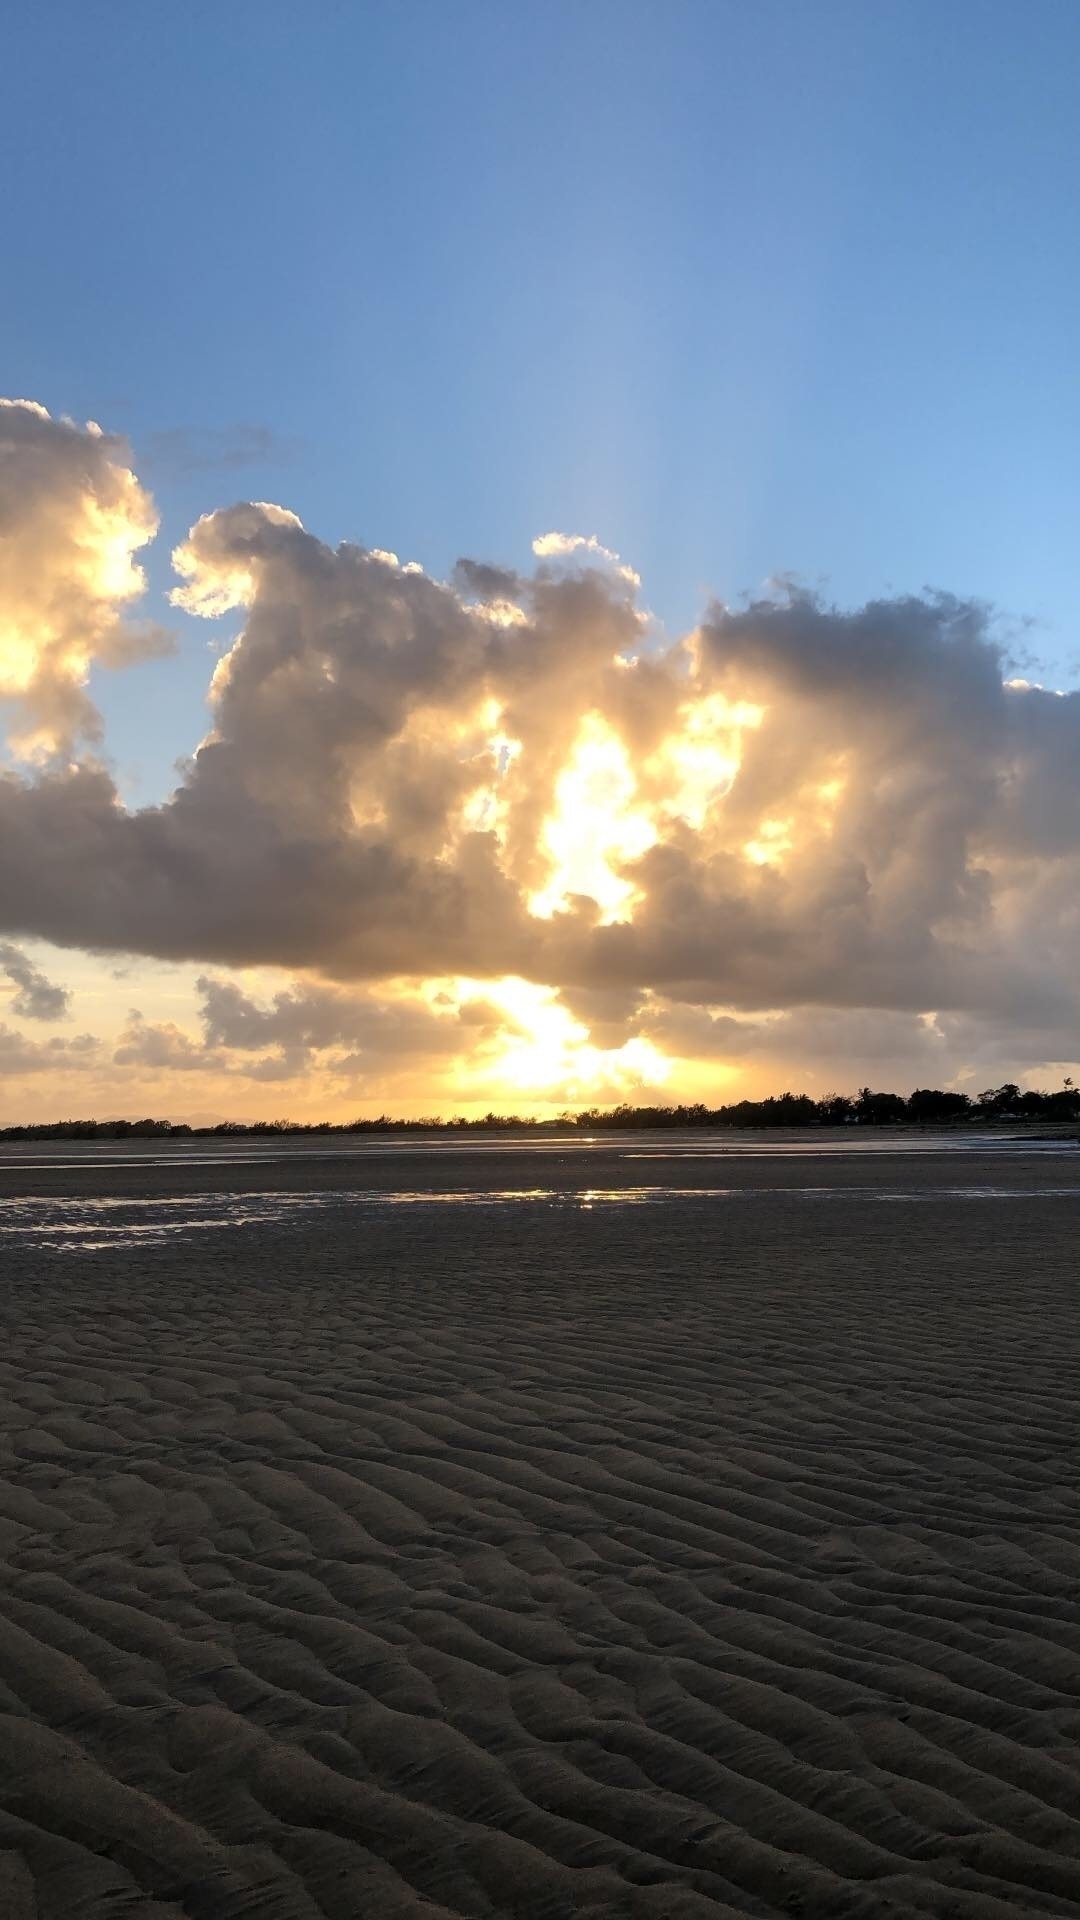 A beach view. Sand stretches out in front of the photographer with patches of water where the tide is still running out. The sky has a band of cloud with the sun flaring a yellow orange behind it.